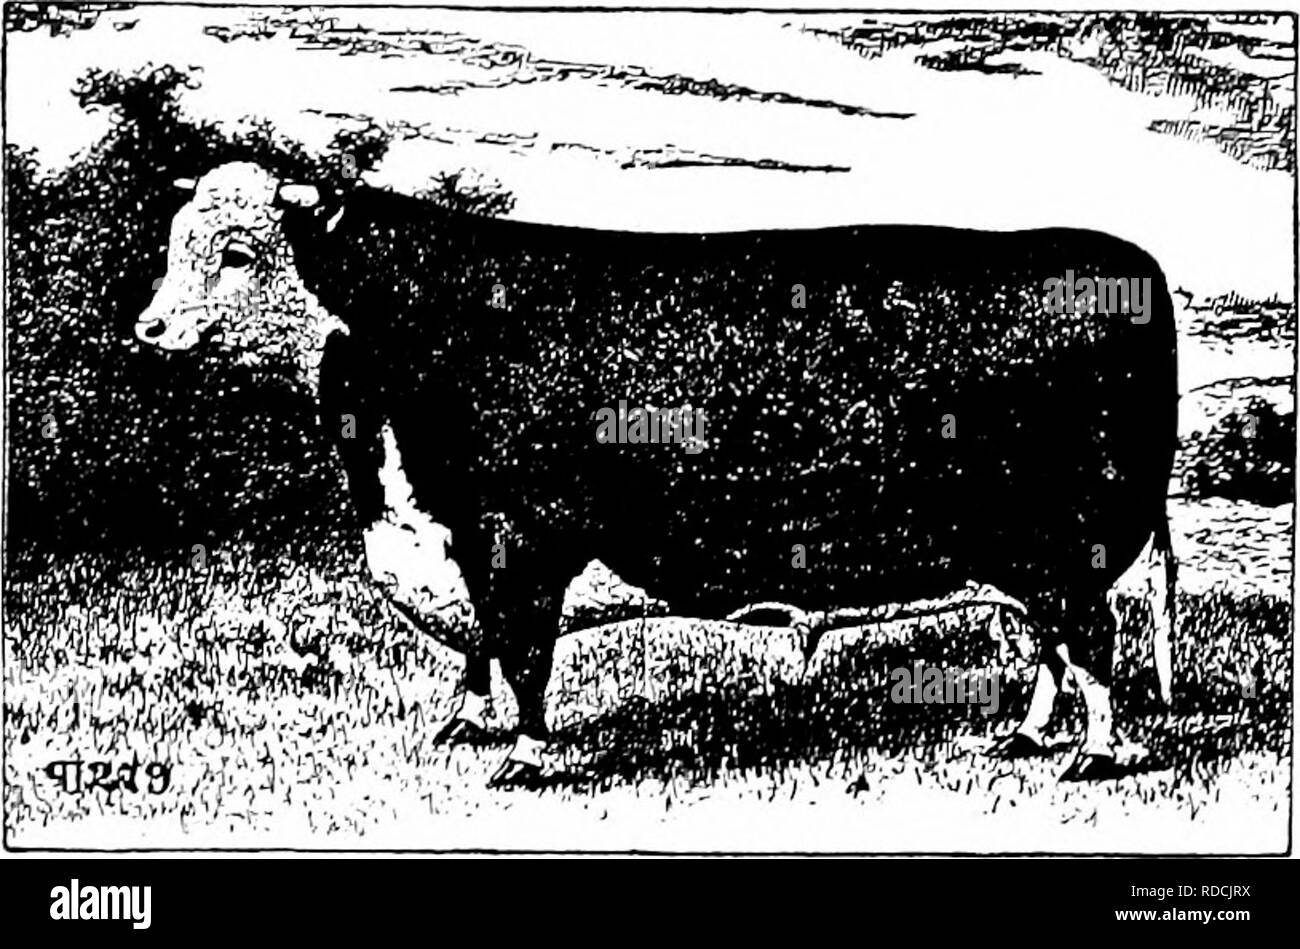 . History of Hereford cattle : proven conclusively the oldest of improved breeds . Hereford cattle. 372 HISTORY OF HEREFORD CATTLE tlurtecnth volume, 1 mention here, contains the names of 199 breeders, of whom 11 are either m the United States or Canada. The four- teenth volume, which is to be issued in Feb- ruary next, contains, I am informed, a much larger number of breeders' names. I hardly think it necessary, but still I venture to suggest that no American owner or breeder of Here- fords eligible for entry should omit to register them. The Herd Book is under the control of S. W. Urwick, Es Stock Photo